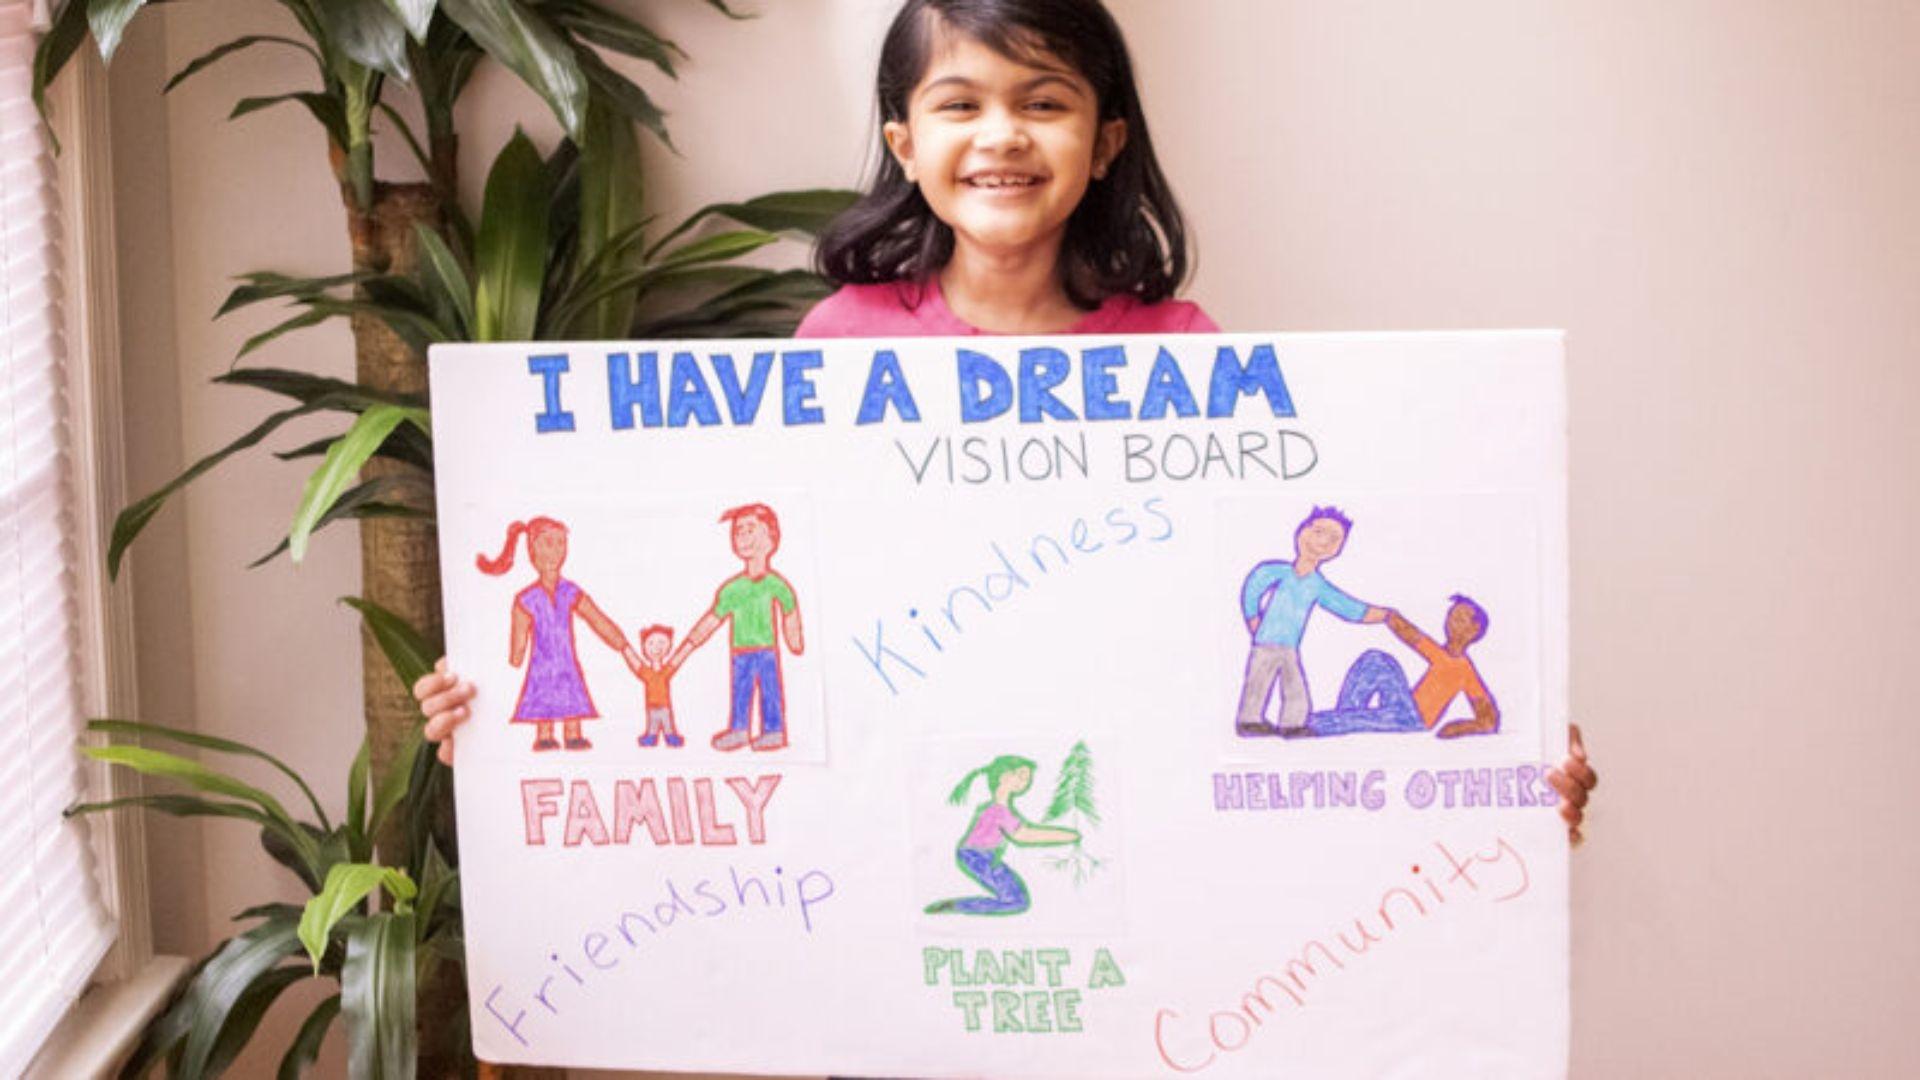 A girl holding up her "I Have A Dream" vision board while smiling.